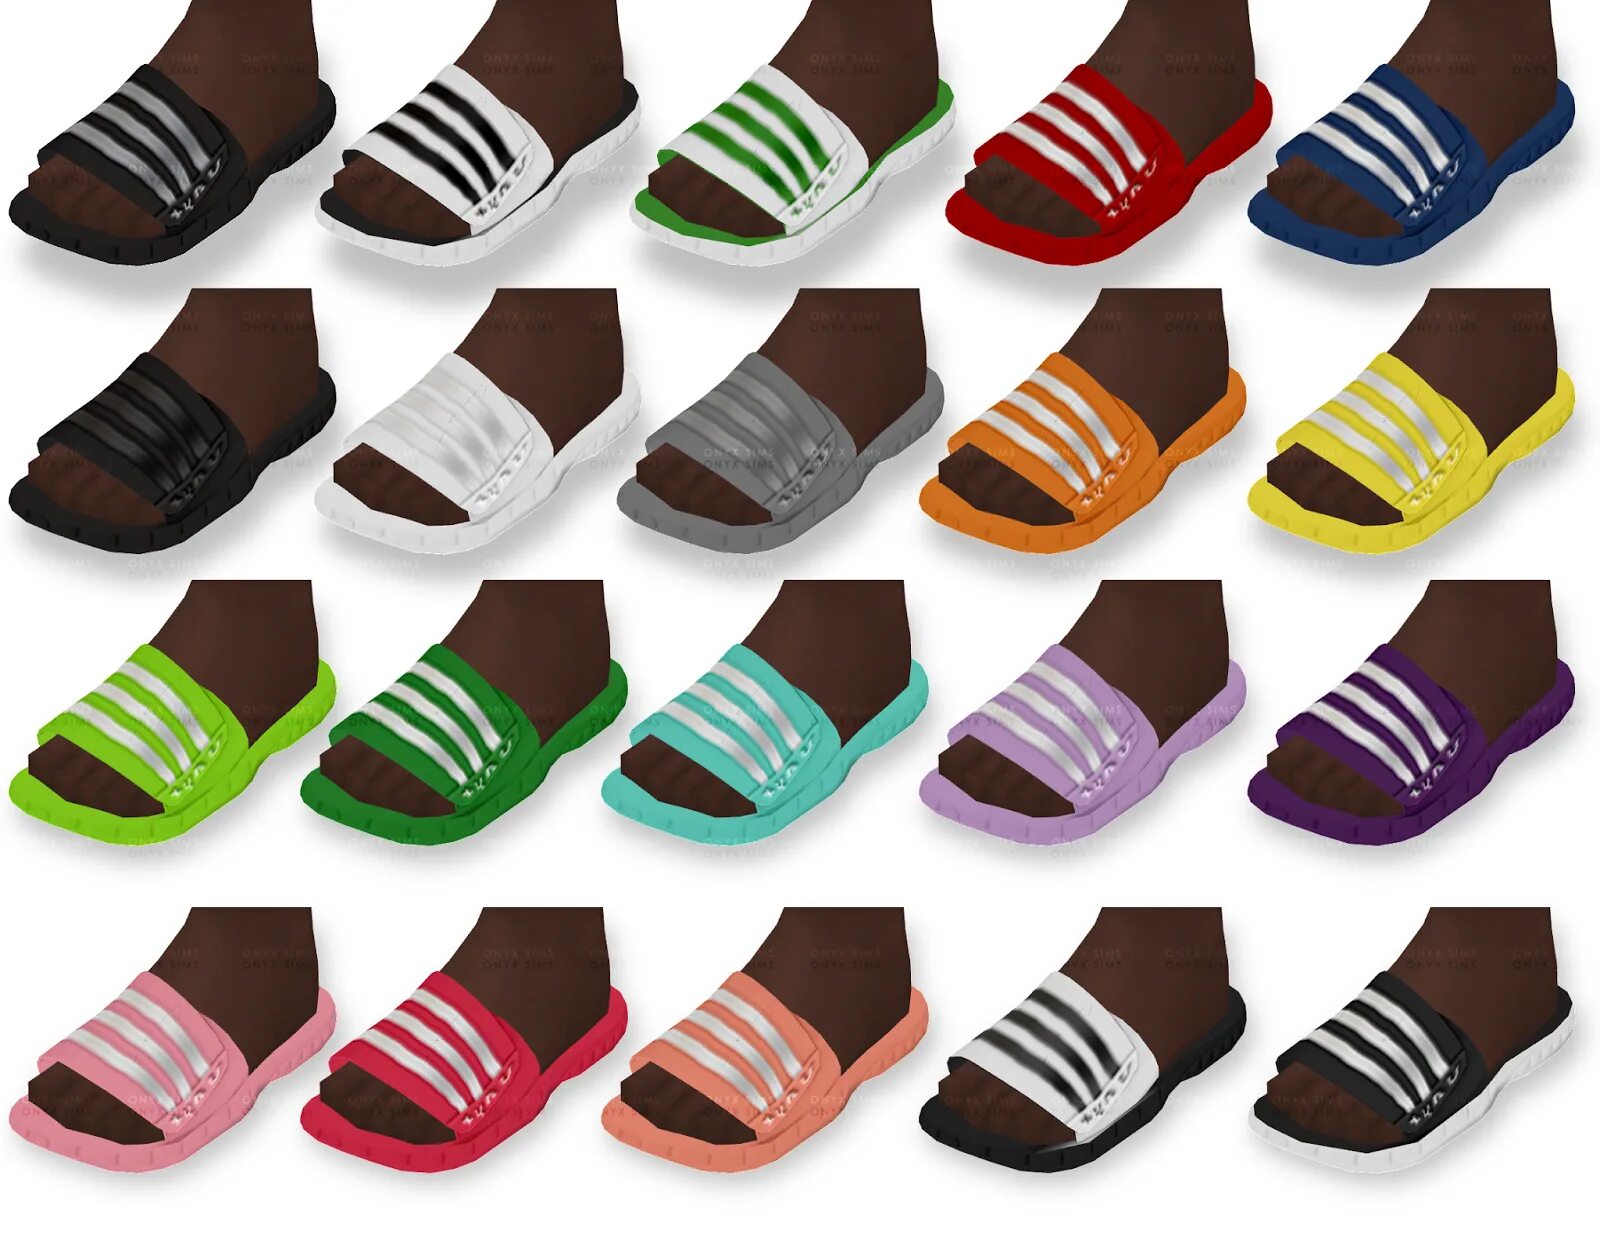 Mini collection. Adidas Mini collection Slides SIMS 4. SIMS 4 сланцы. Slippers SIMS 4. SIMS 4 тапочки.